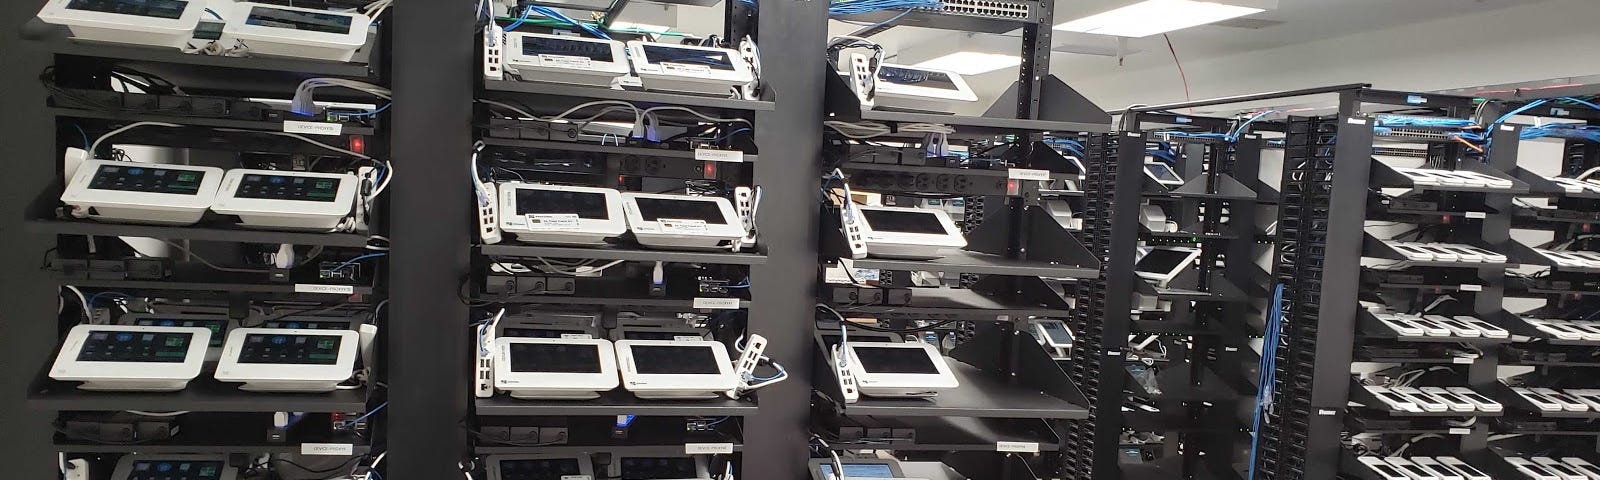 Shelves filled with Clover Mini Point-of-Sale devices for testing.